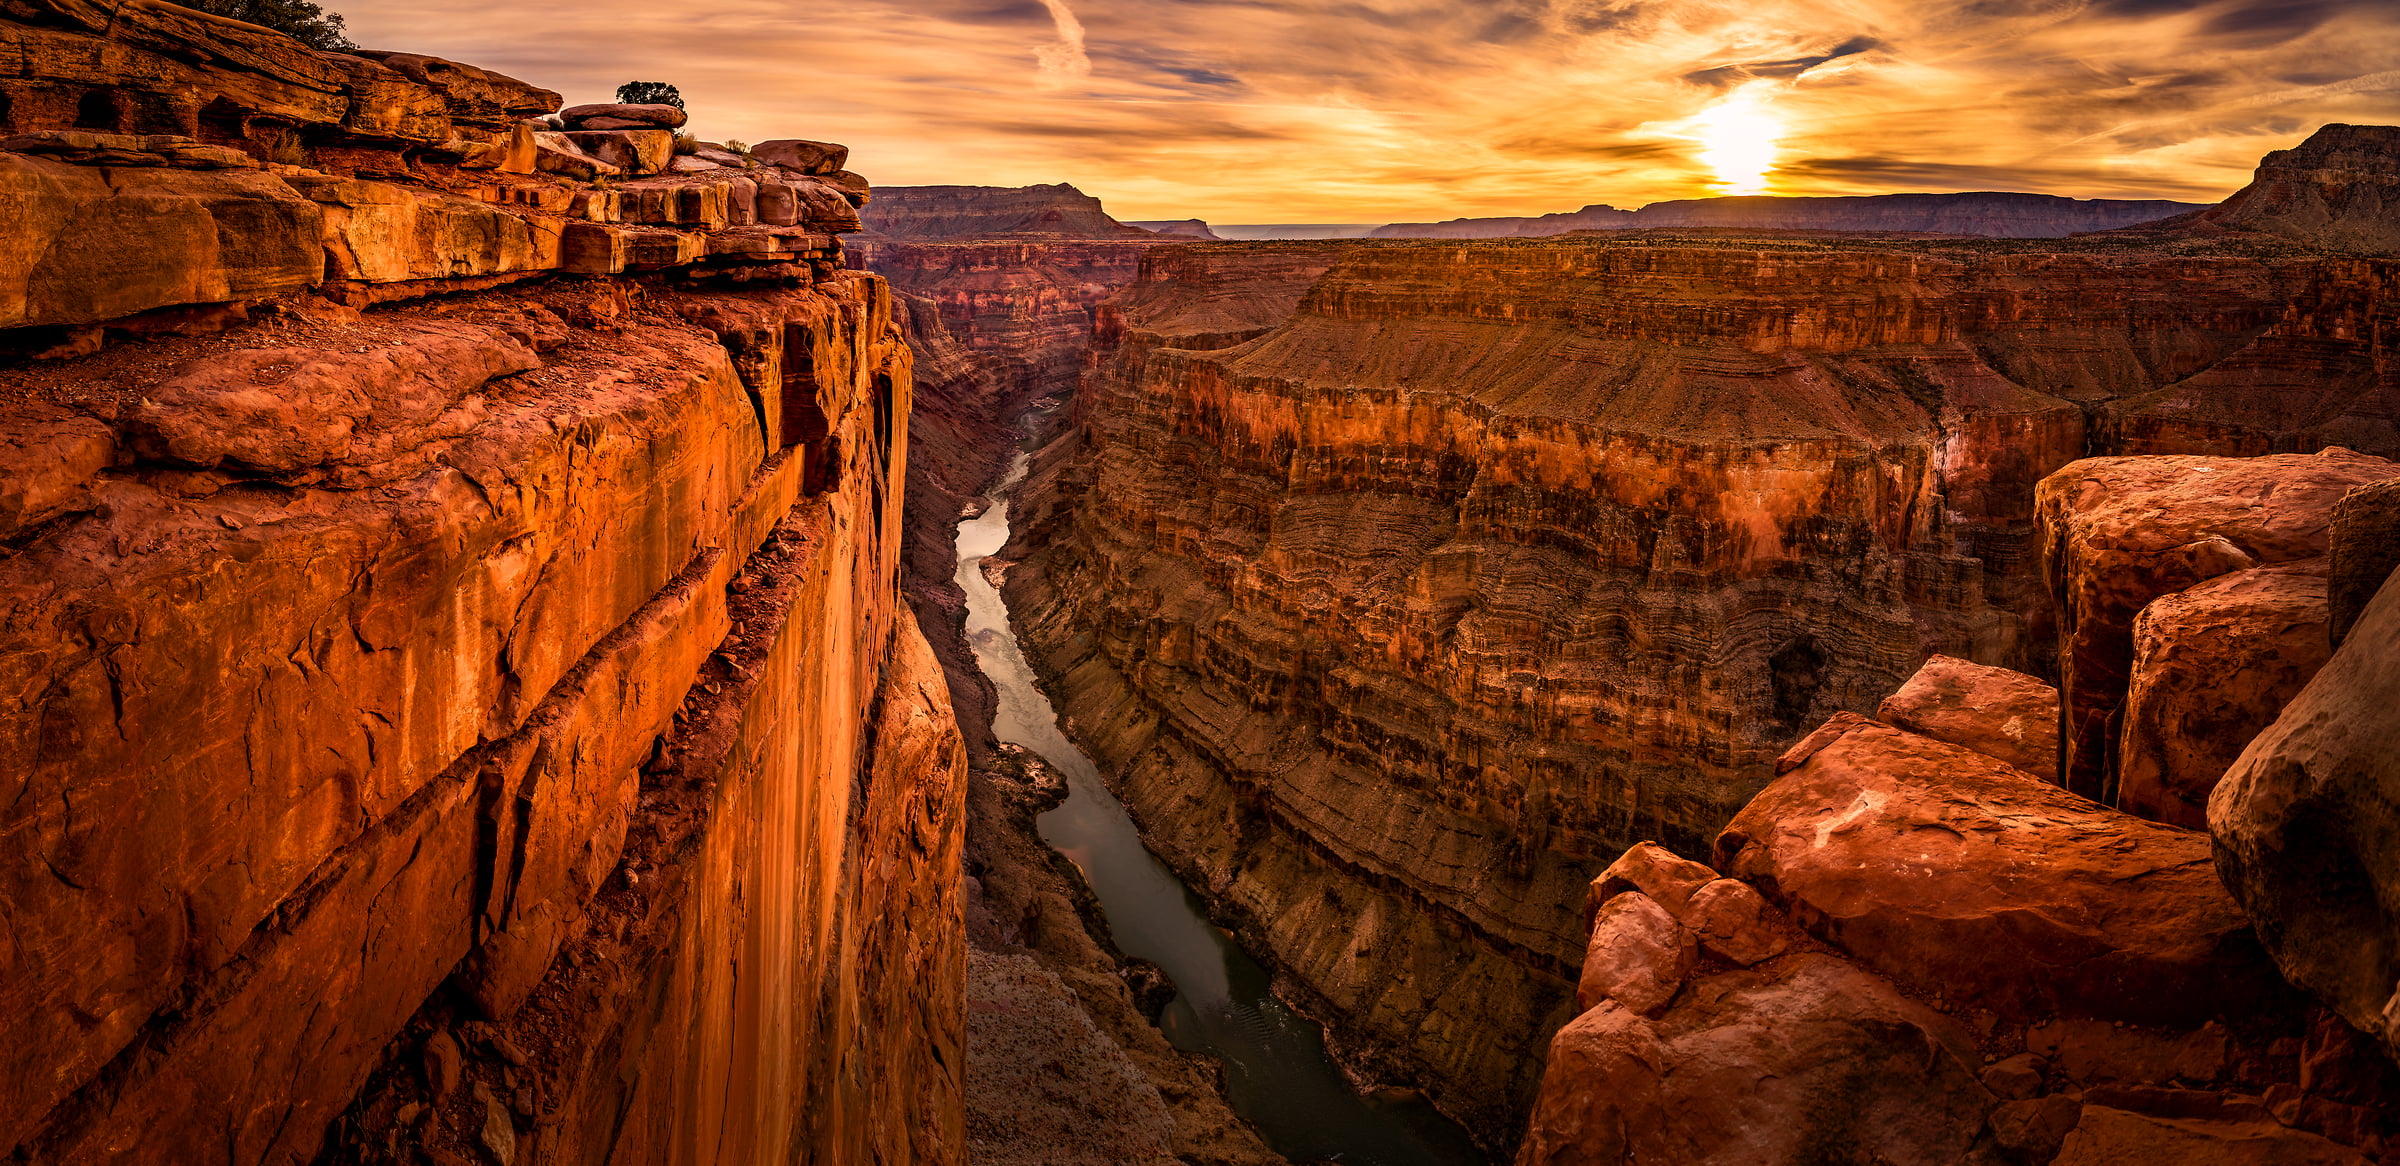 176 megapixels! A very high resolution, large-format VAST photo print of a canyon at sunset; landscape photograph created by Tim Shields in Grand Canyon National Park, Arizona, USA.